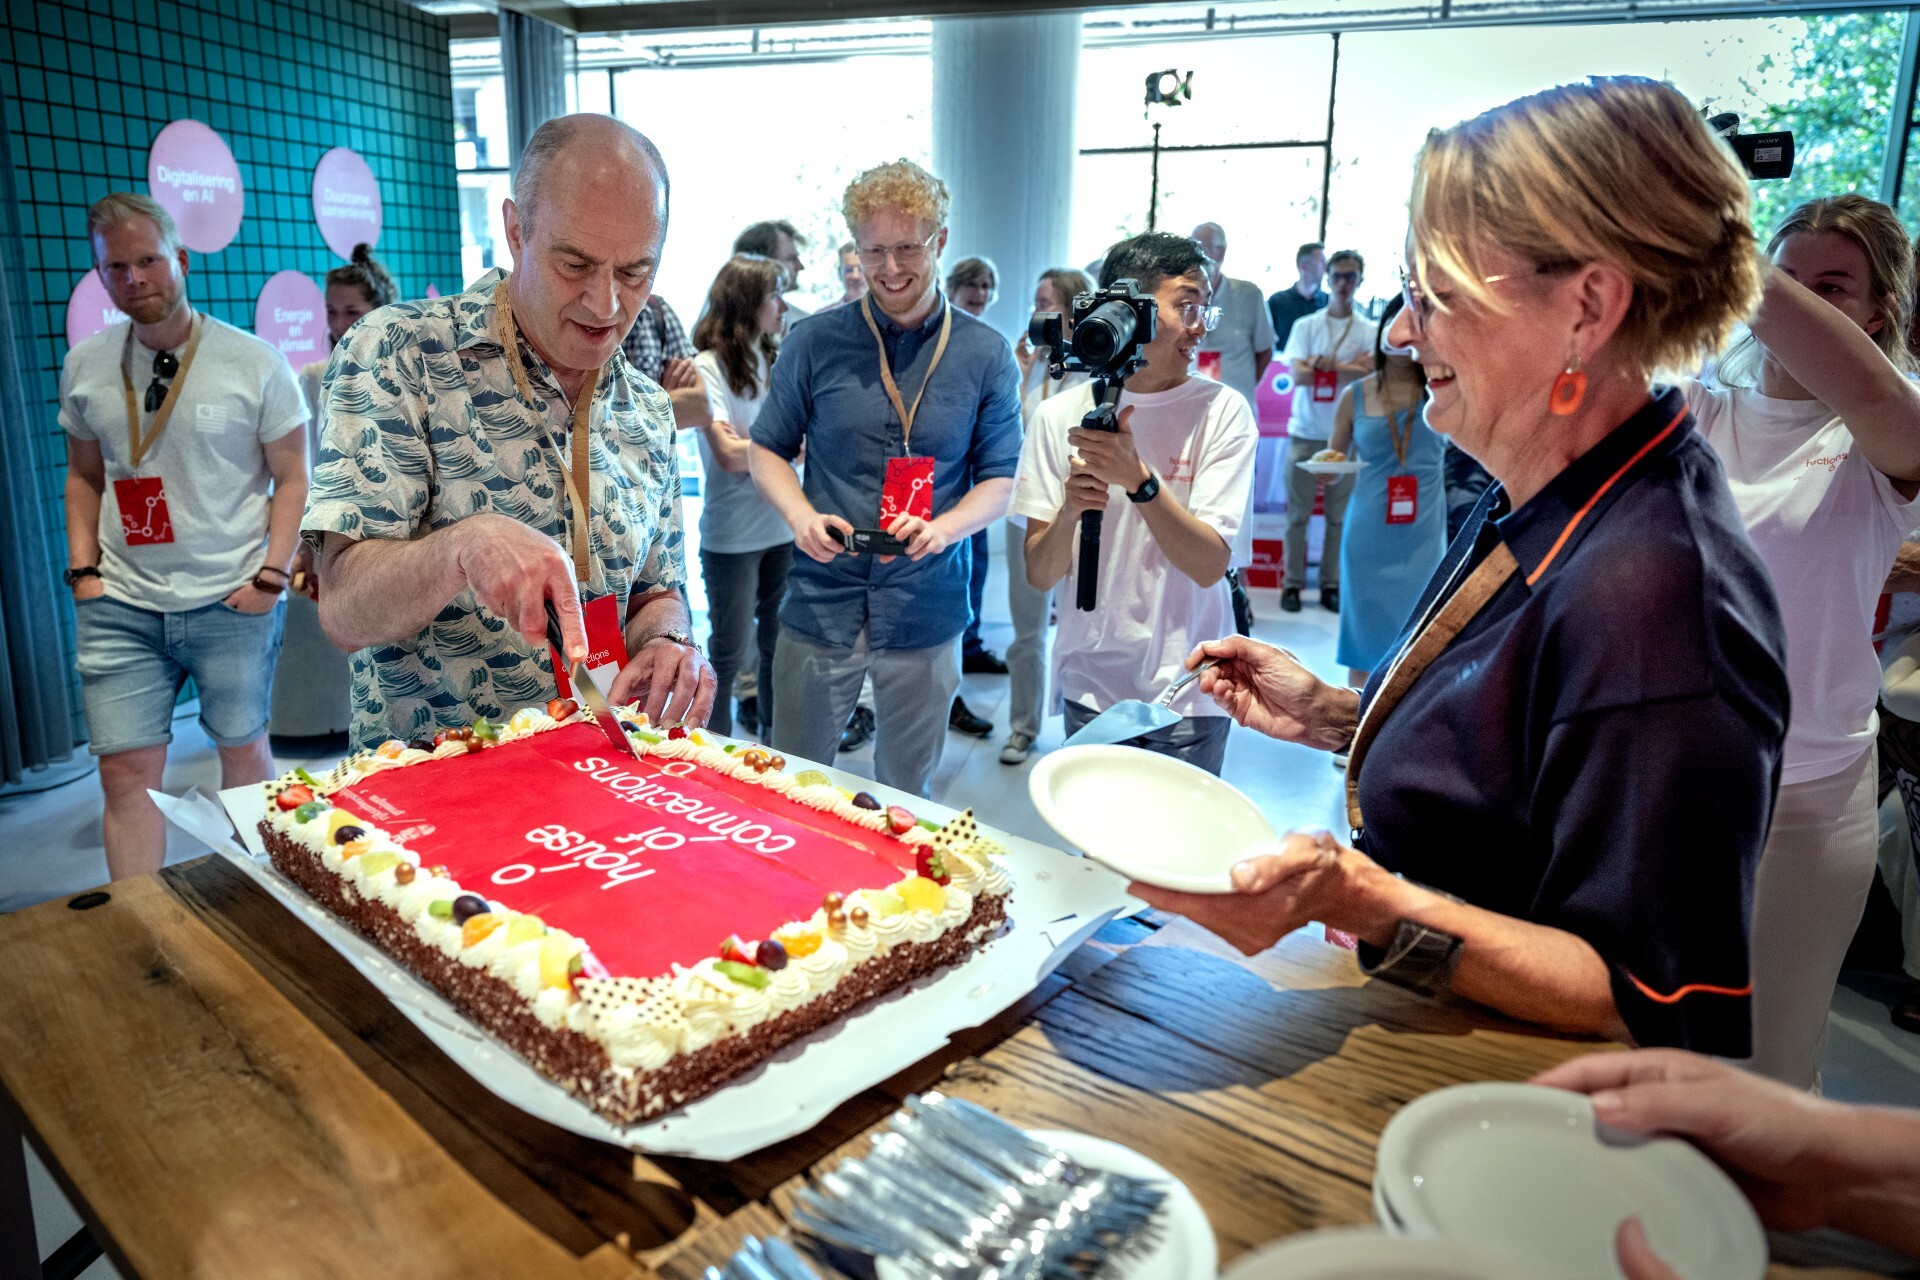 Hans Biemans and Cisca Wijmenga handed out pieces of cake.